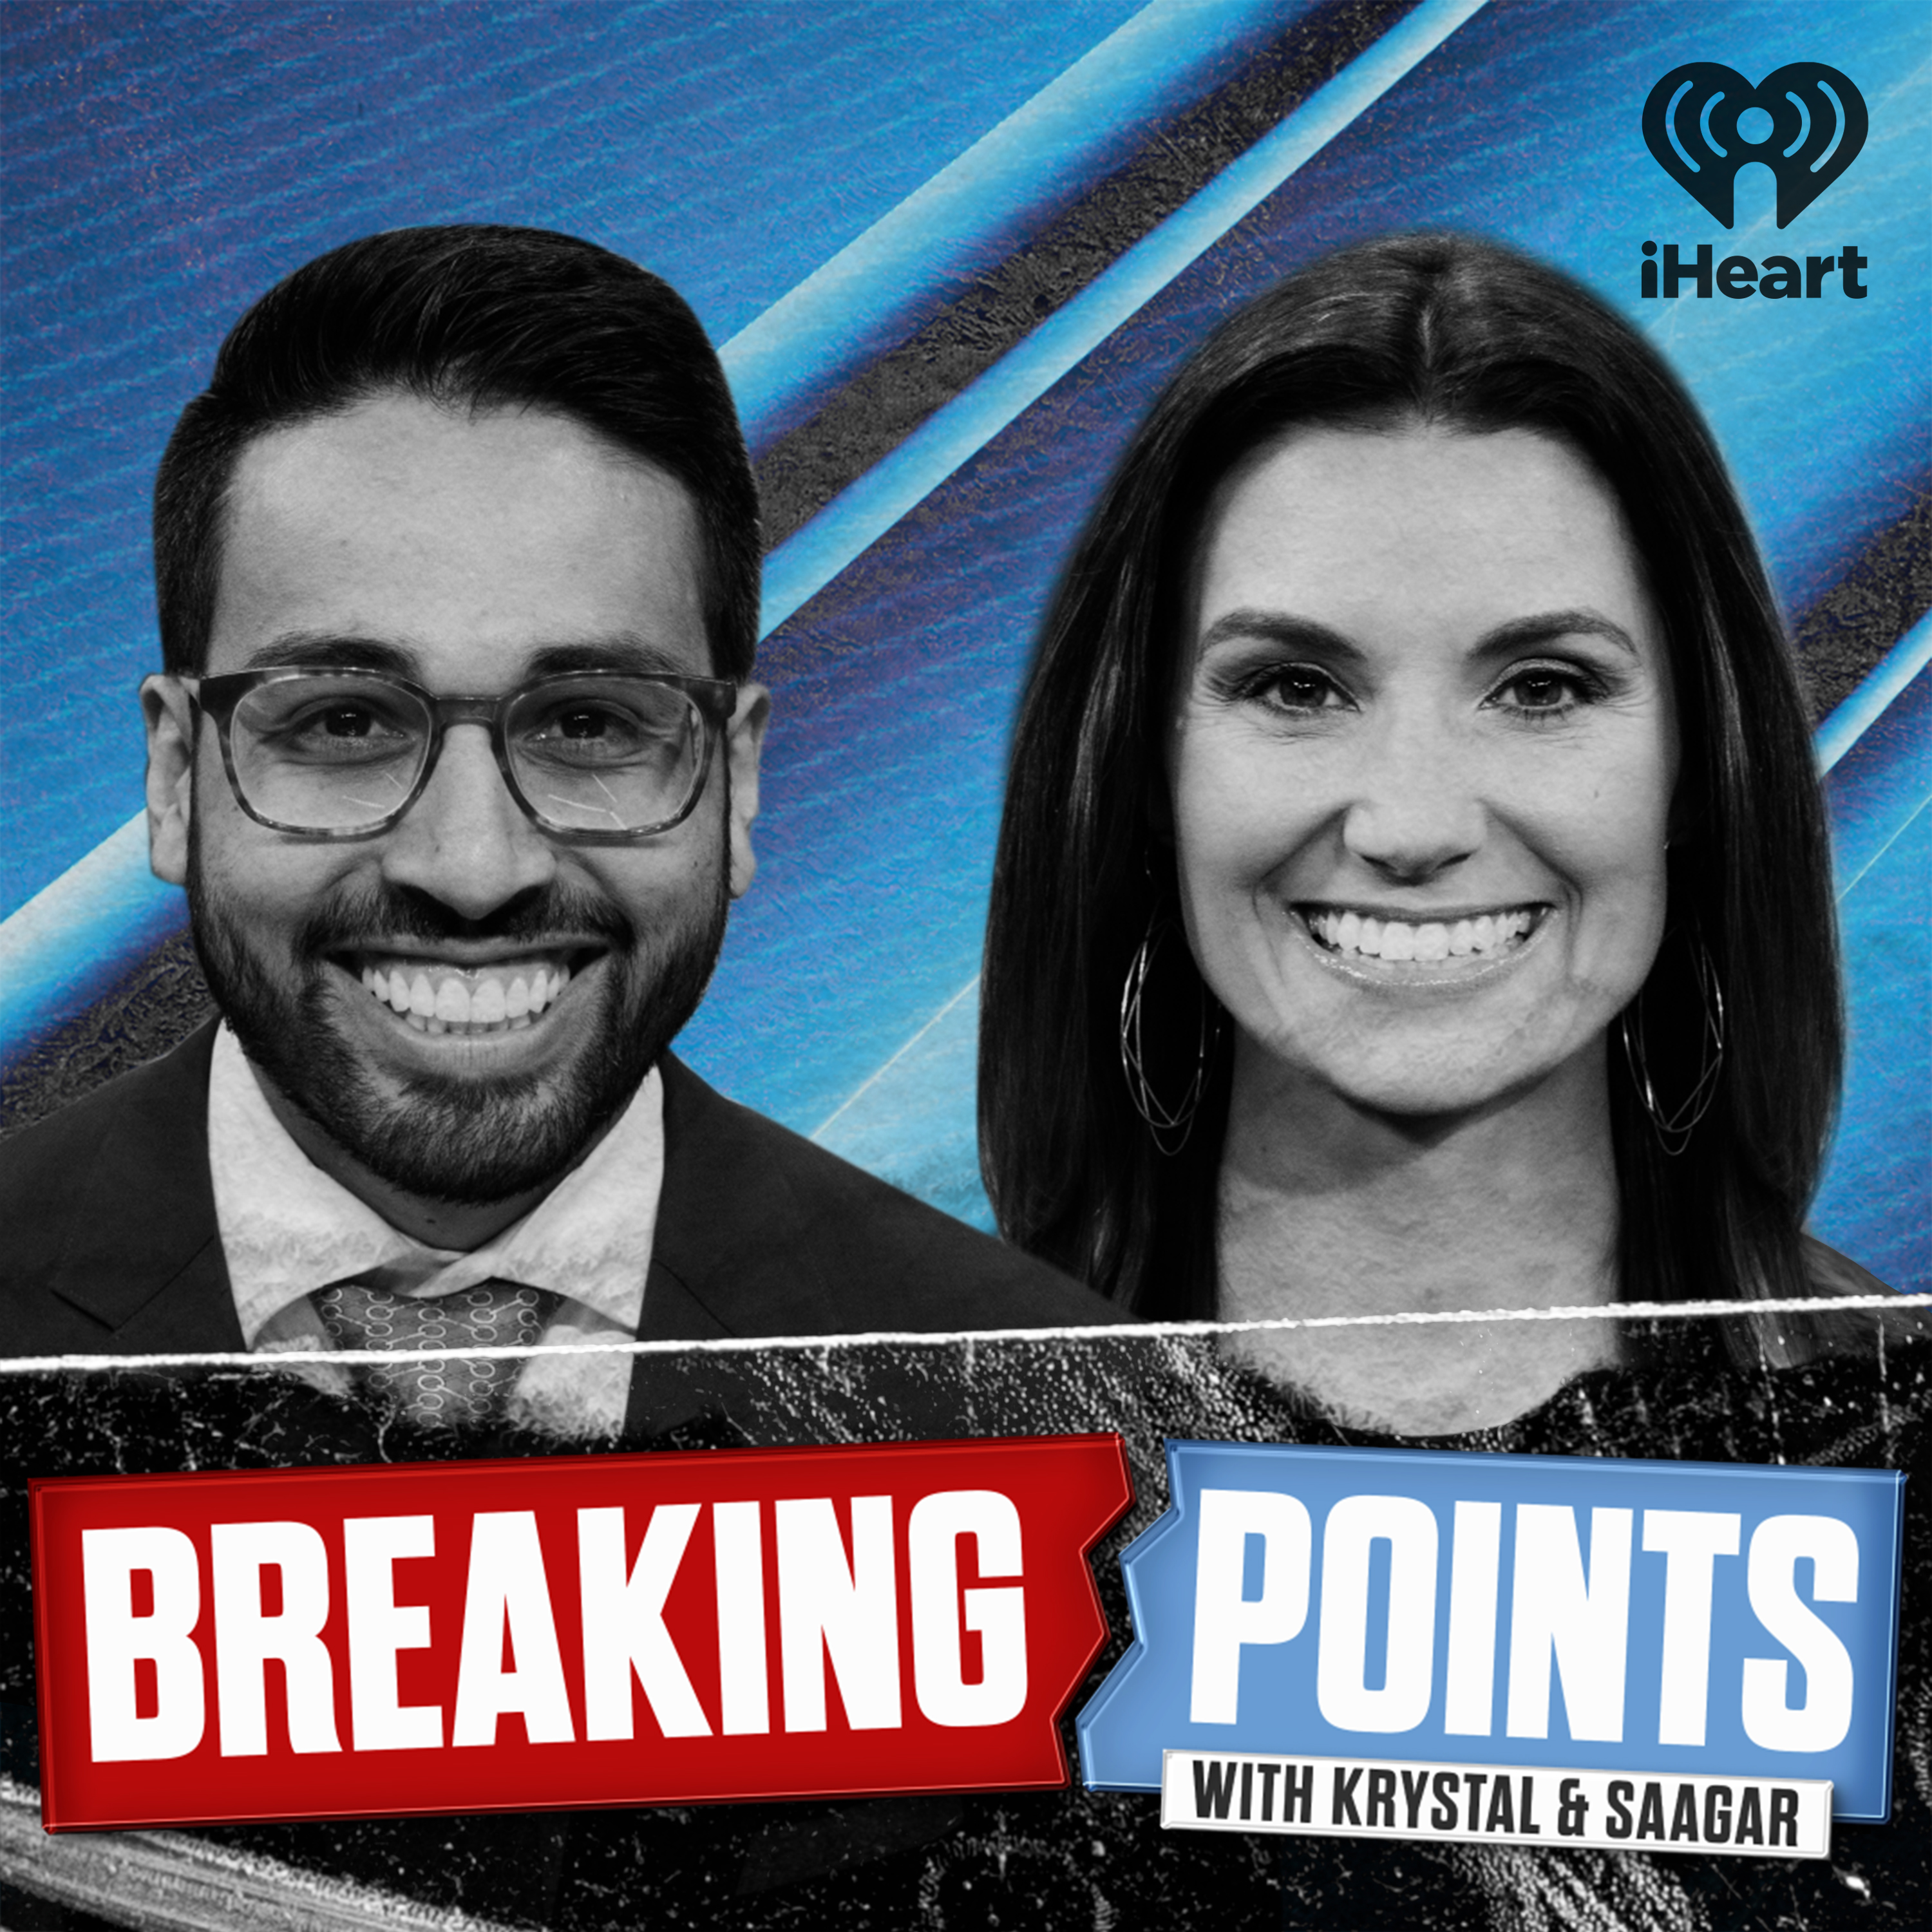 Breaking Points FIRST SHOW: Dems Screwed In 2022? Facebook's Trump Ban And NYC's Crazy Mayoral Race ft Glenn Greenwald